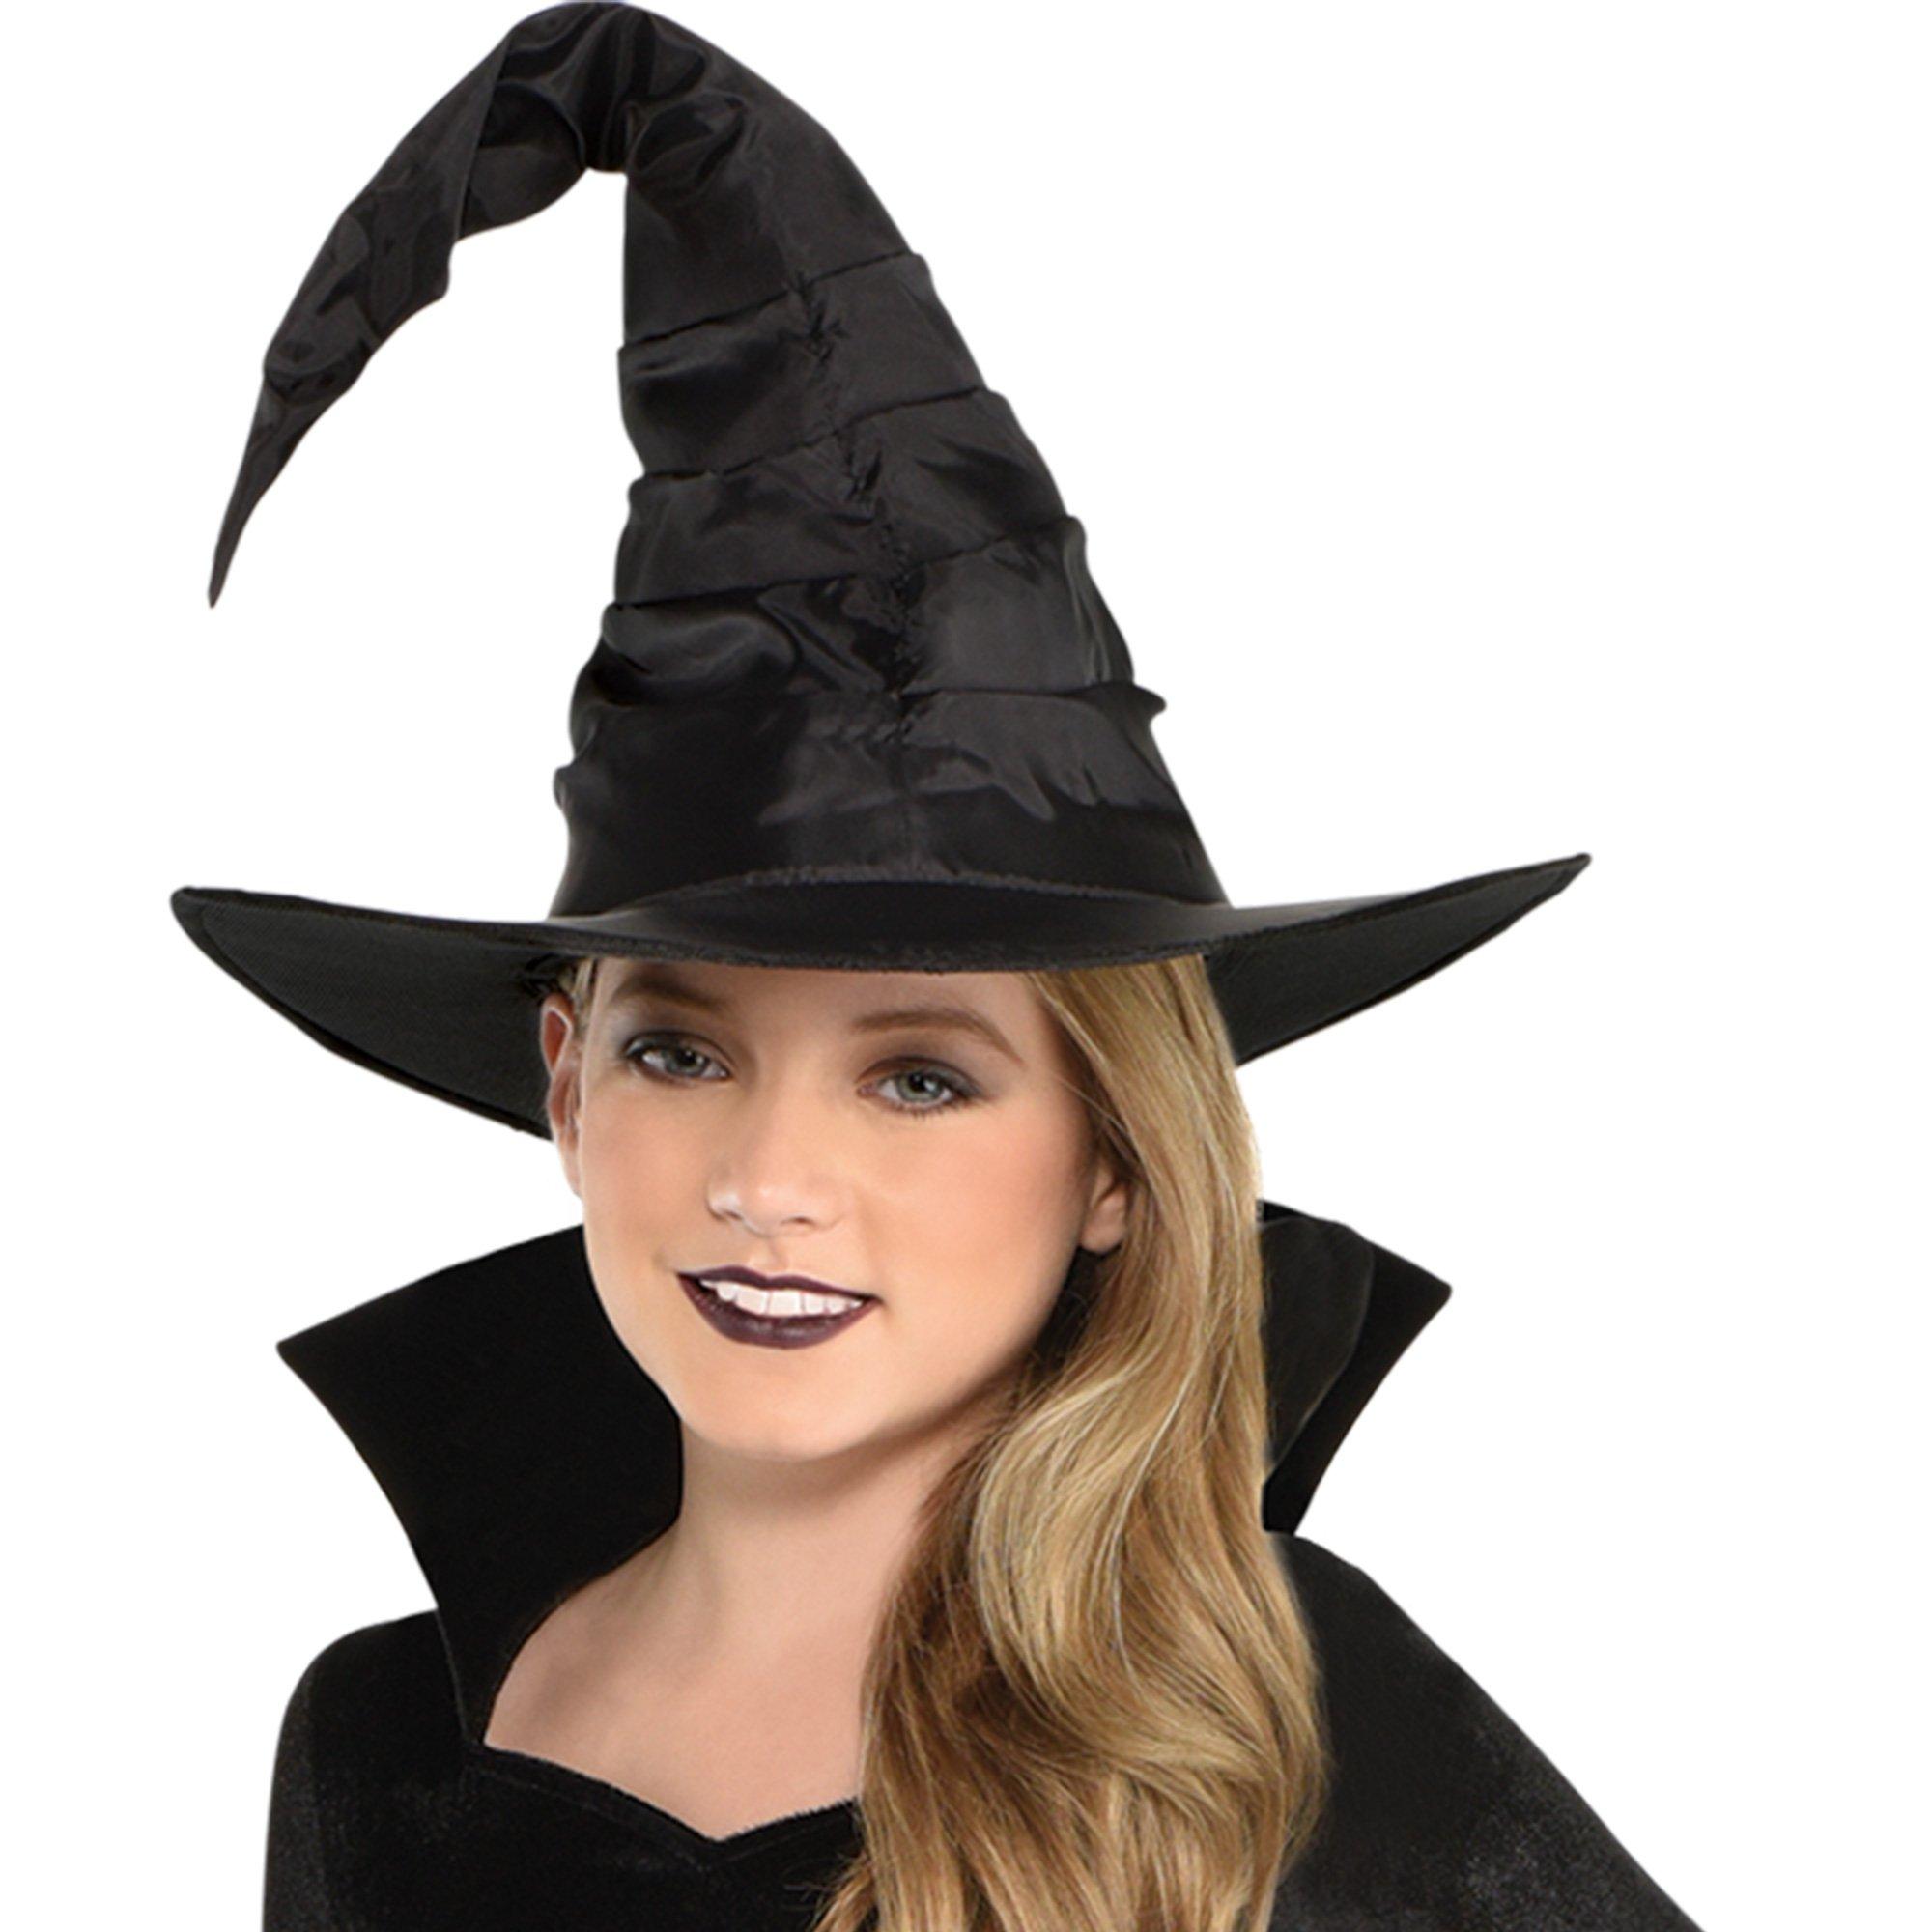 Kids' Fairytale Witch Costume